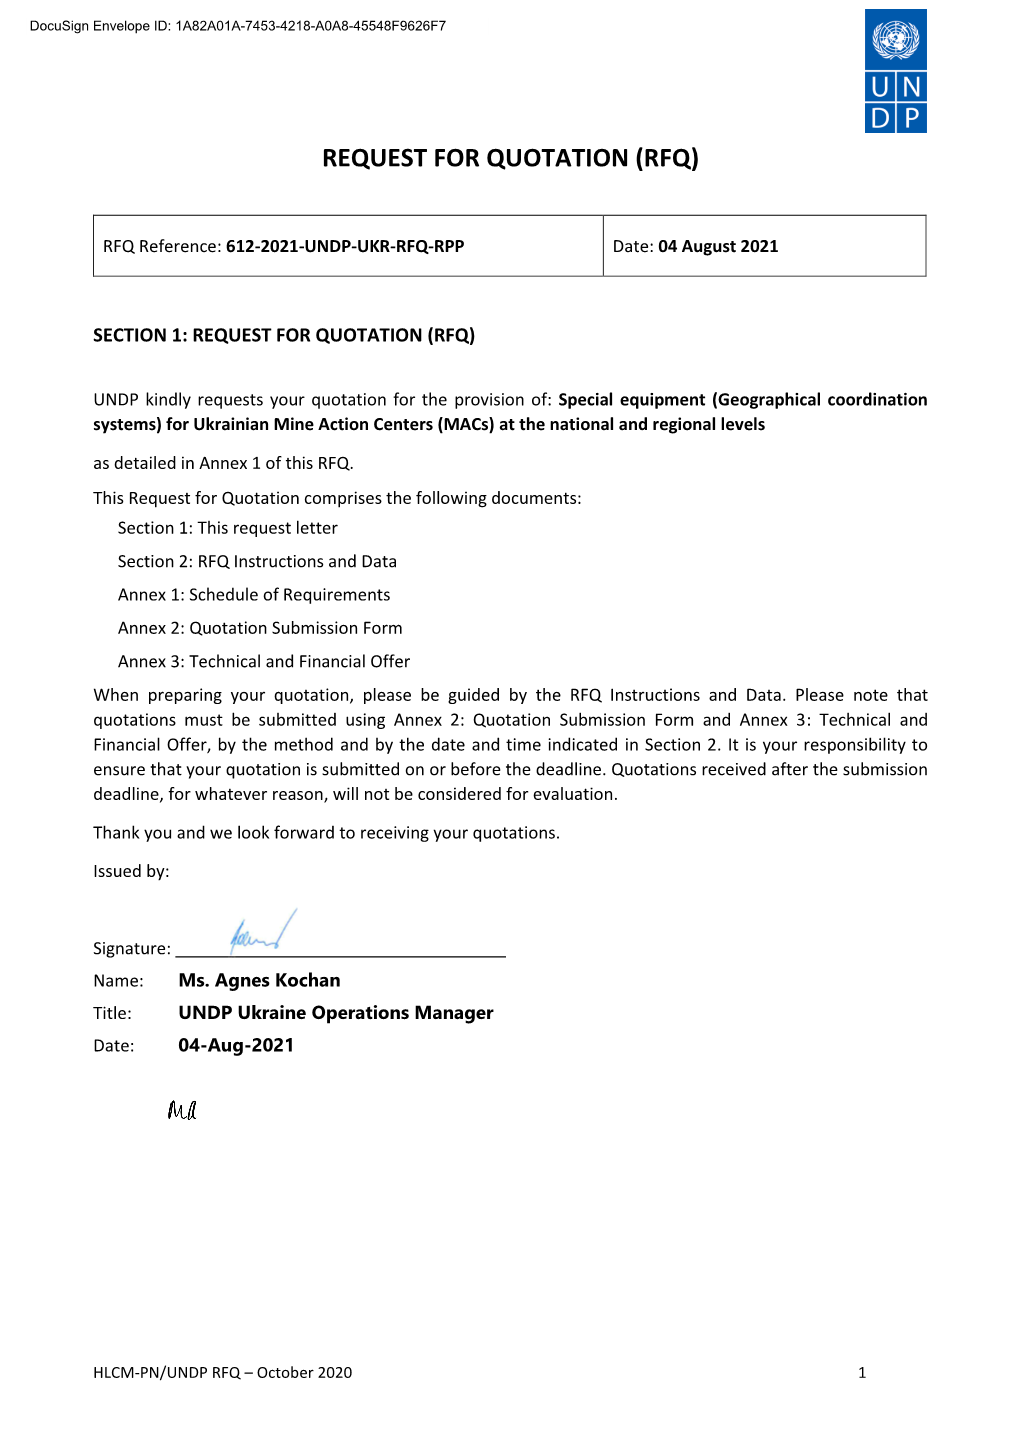 Request for Quotation (Rfq)